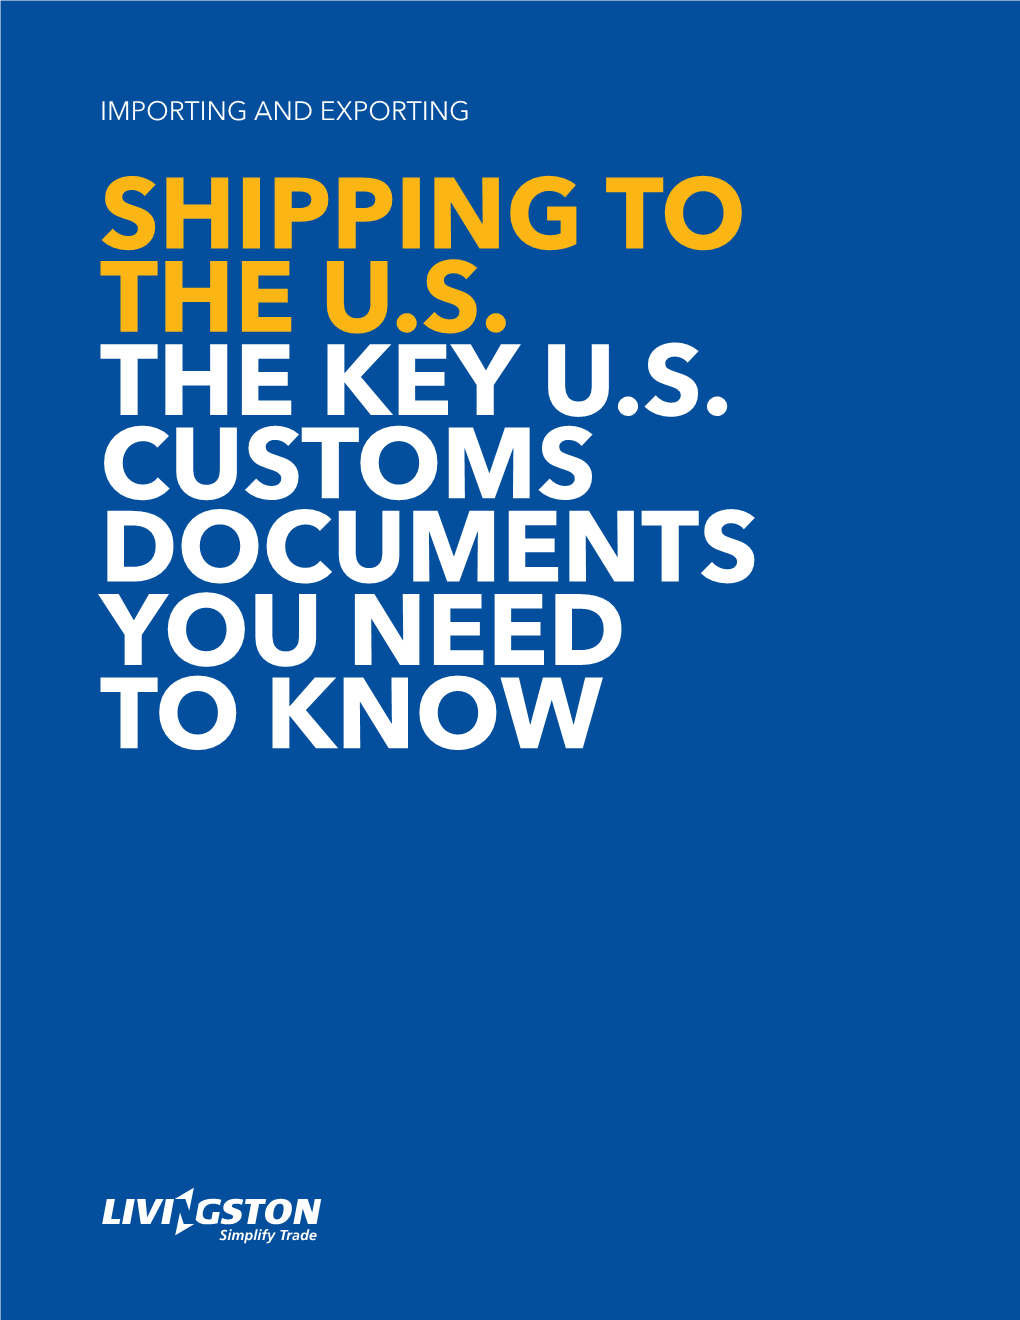 The Key U.S. Customs Documents You Need to Know Importing and Exporting Shipping to the U.S